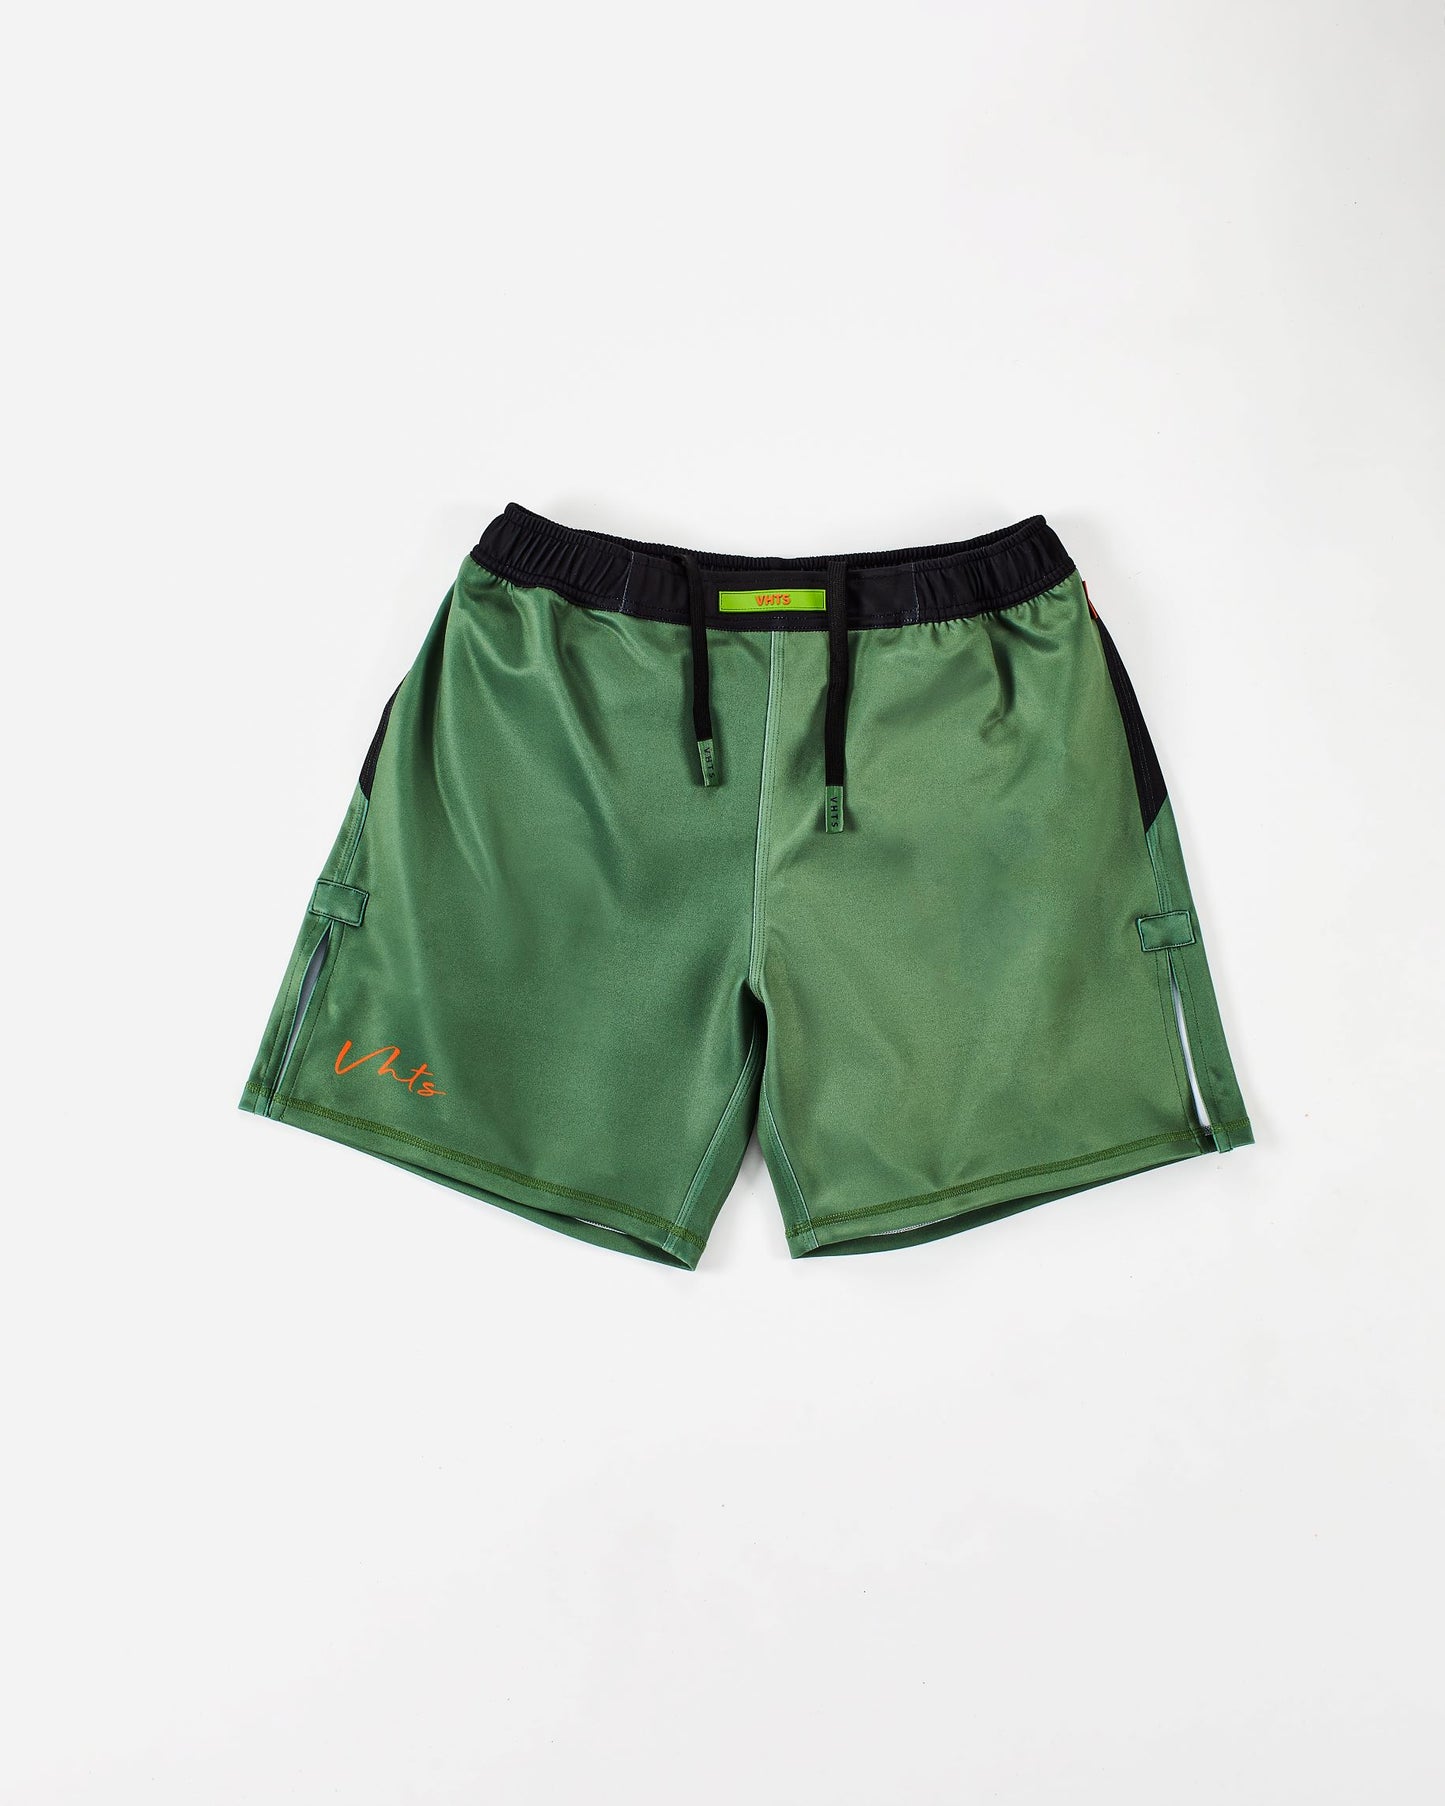 Spring/ Summer 2023 special edition "Cell23" Combat shorts